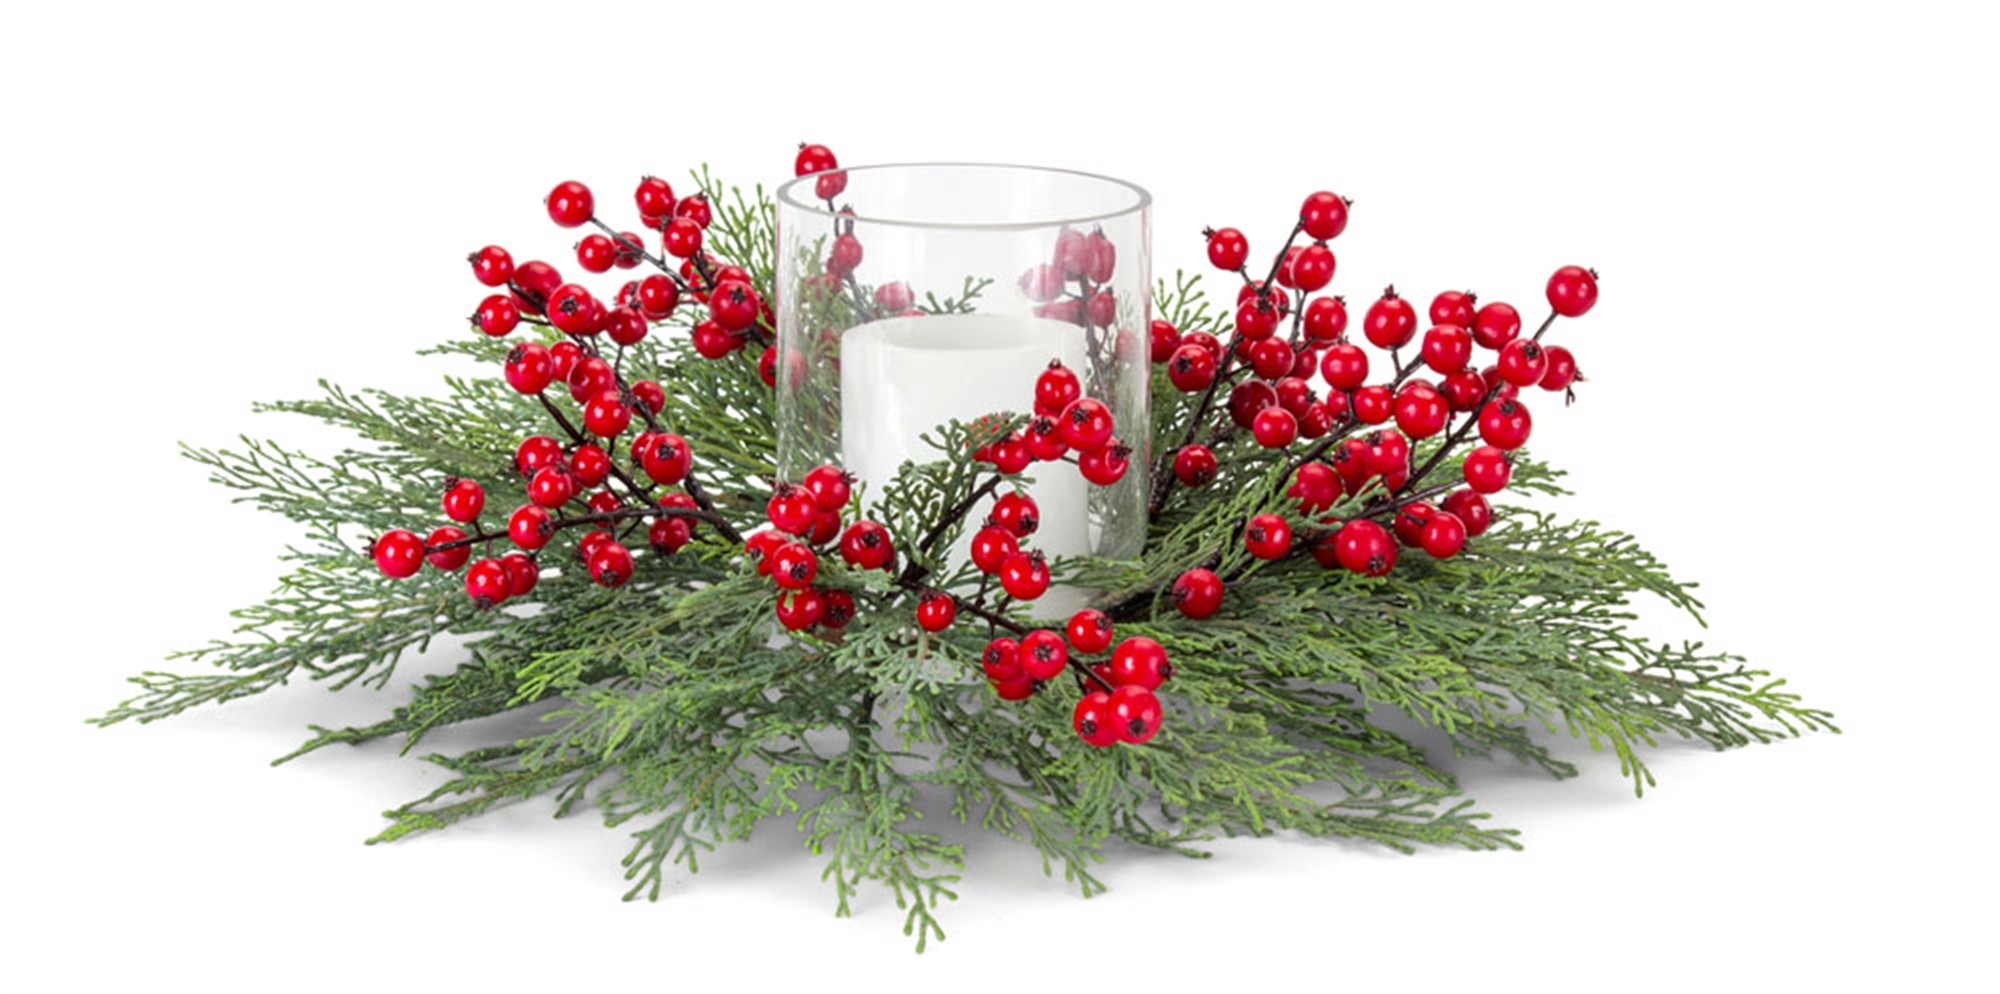 Pine and Berry Candleholder 18"D x 8"H (Set of 2) Plastic/Glass